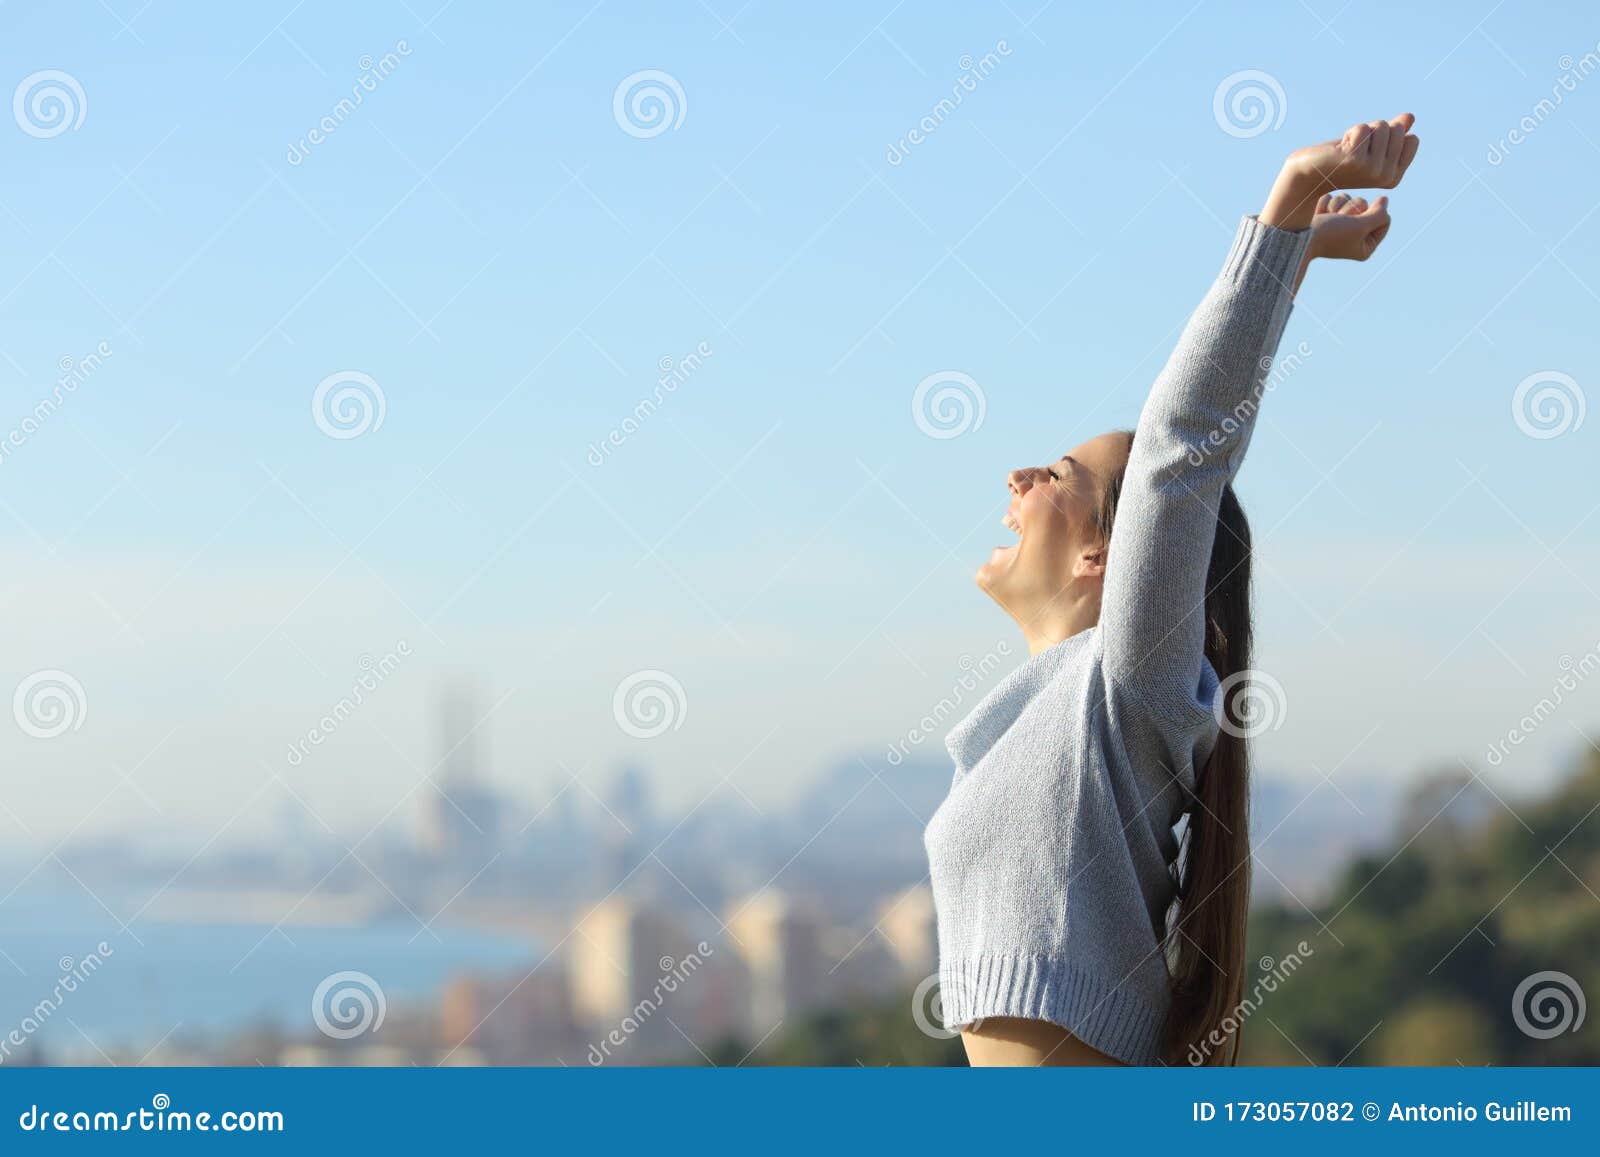 profile of excited woman raising arms in city outskirts